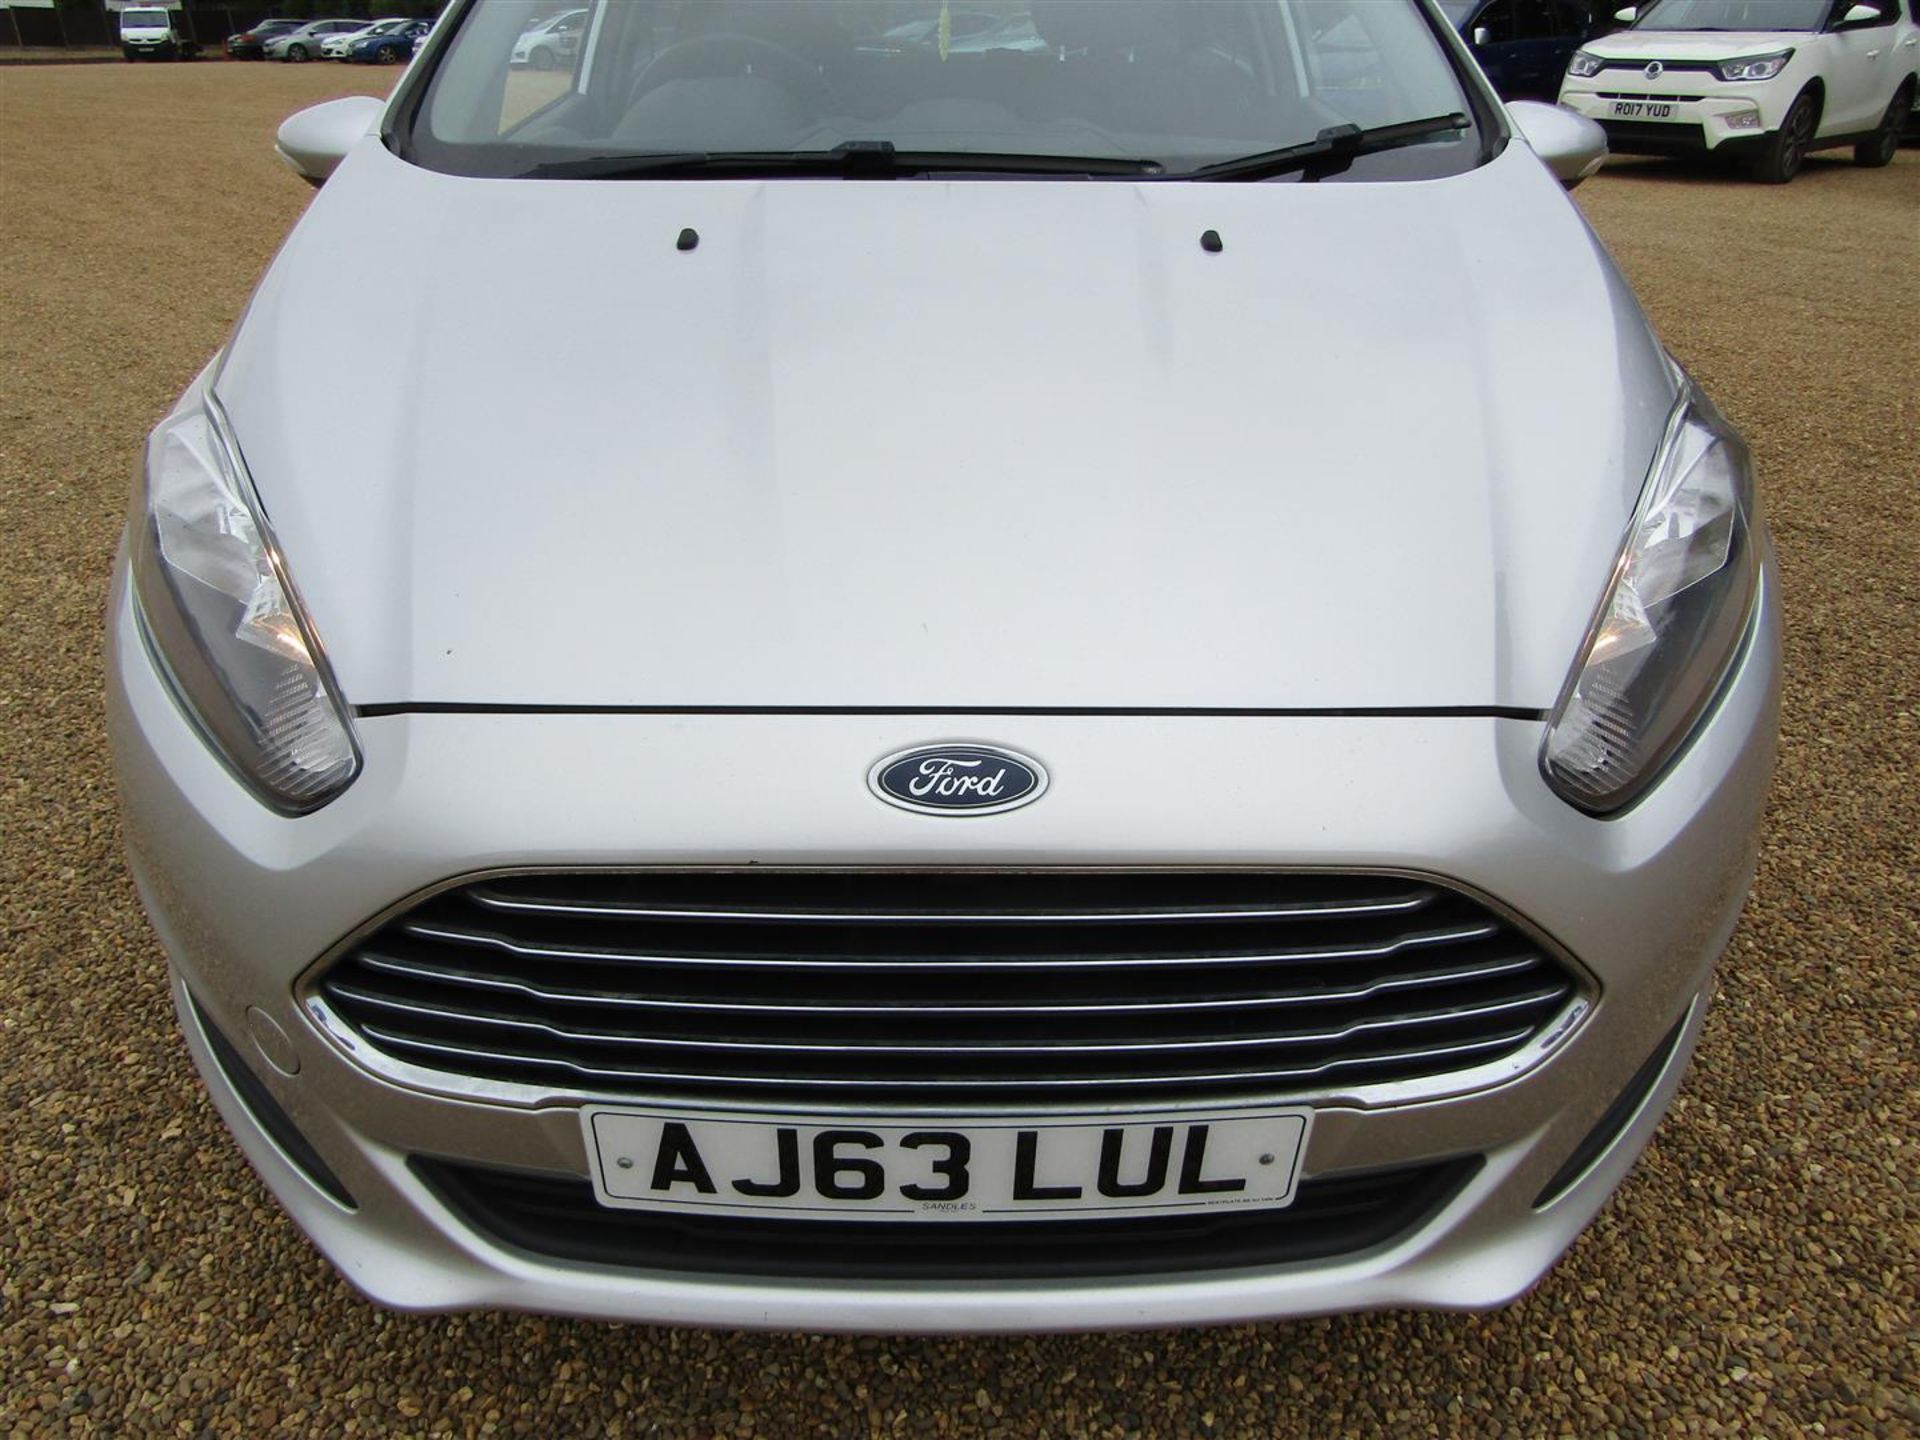 63 13 Ford Fiesta - Image 2 of 38